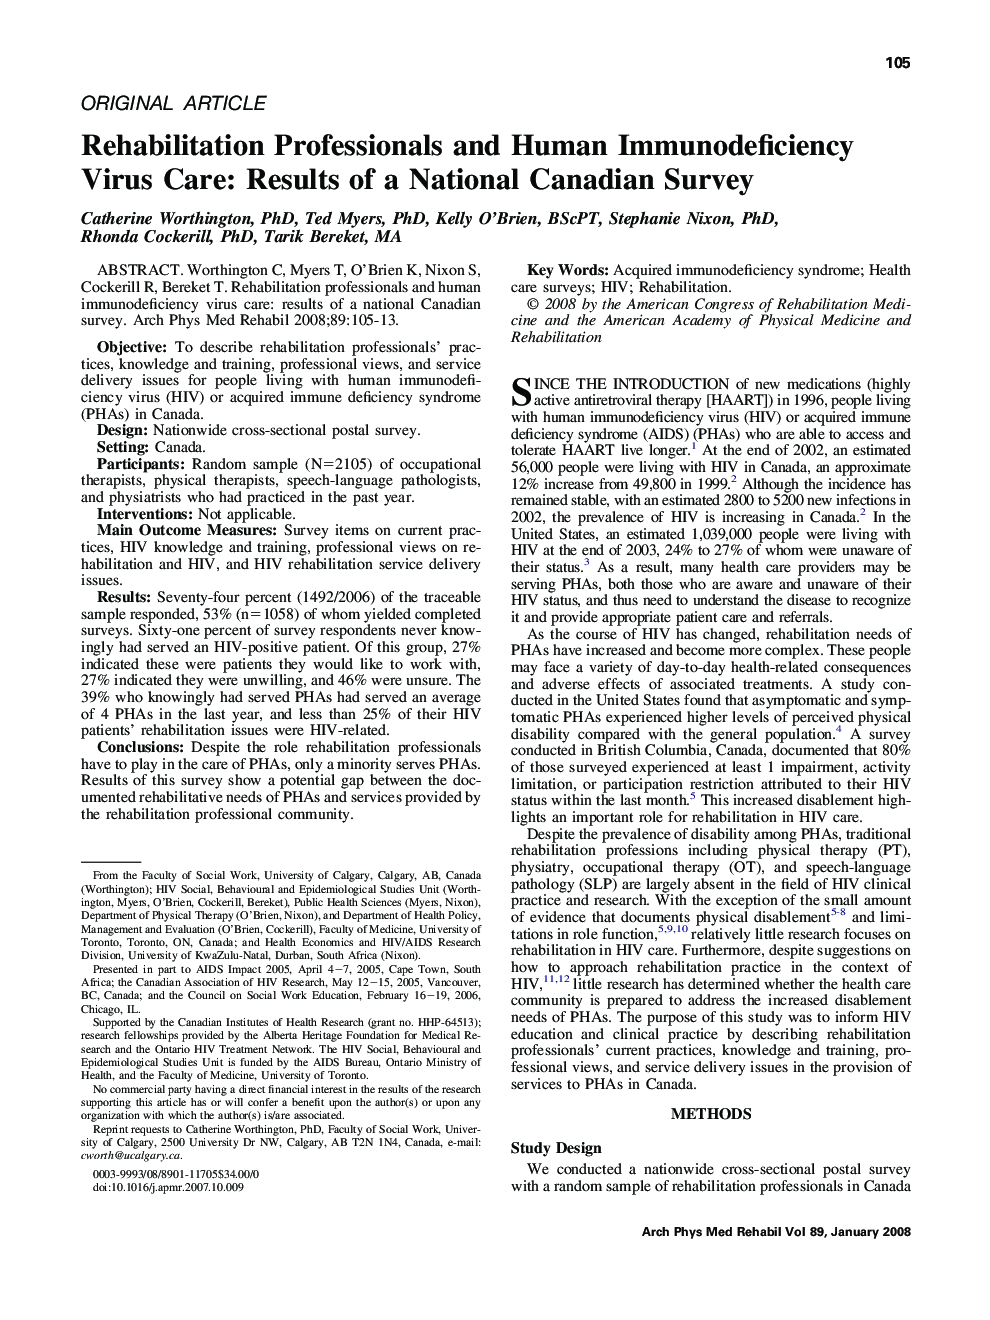 Rehabilitation Professionals and Human Immunodeficiency Virus Care: Results of a National Canadian Survey 